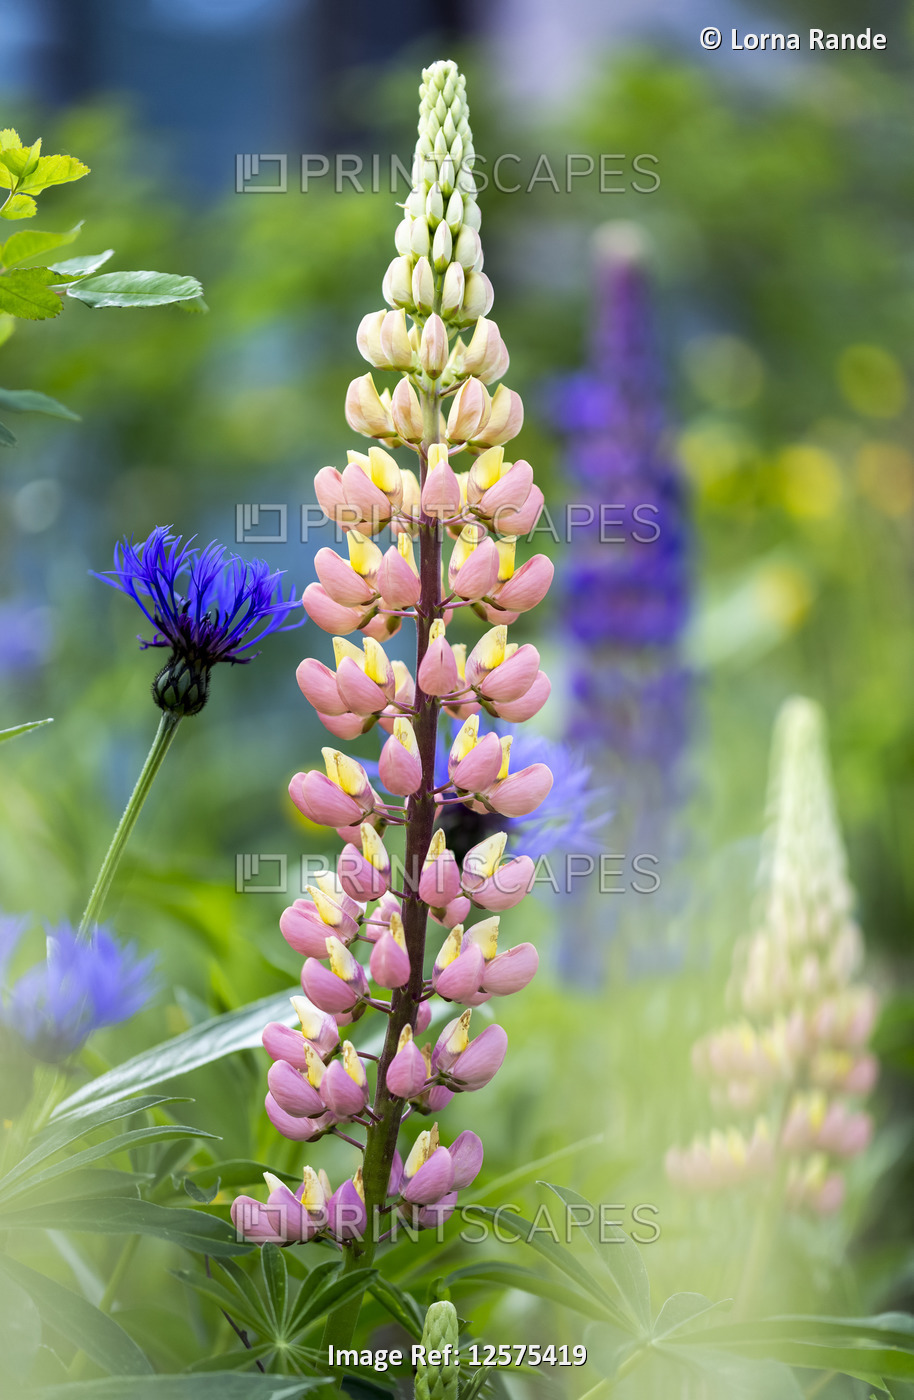 Lupines (Lupinus) in bloom in a garden; Field, British Columbia, Canada